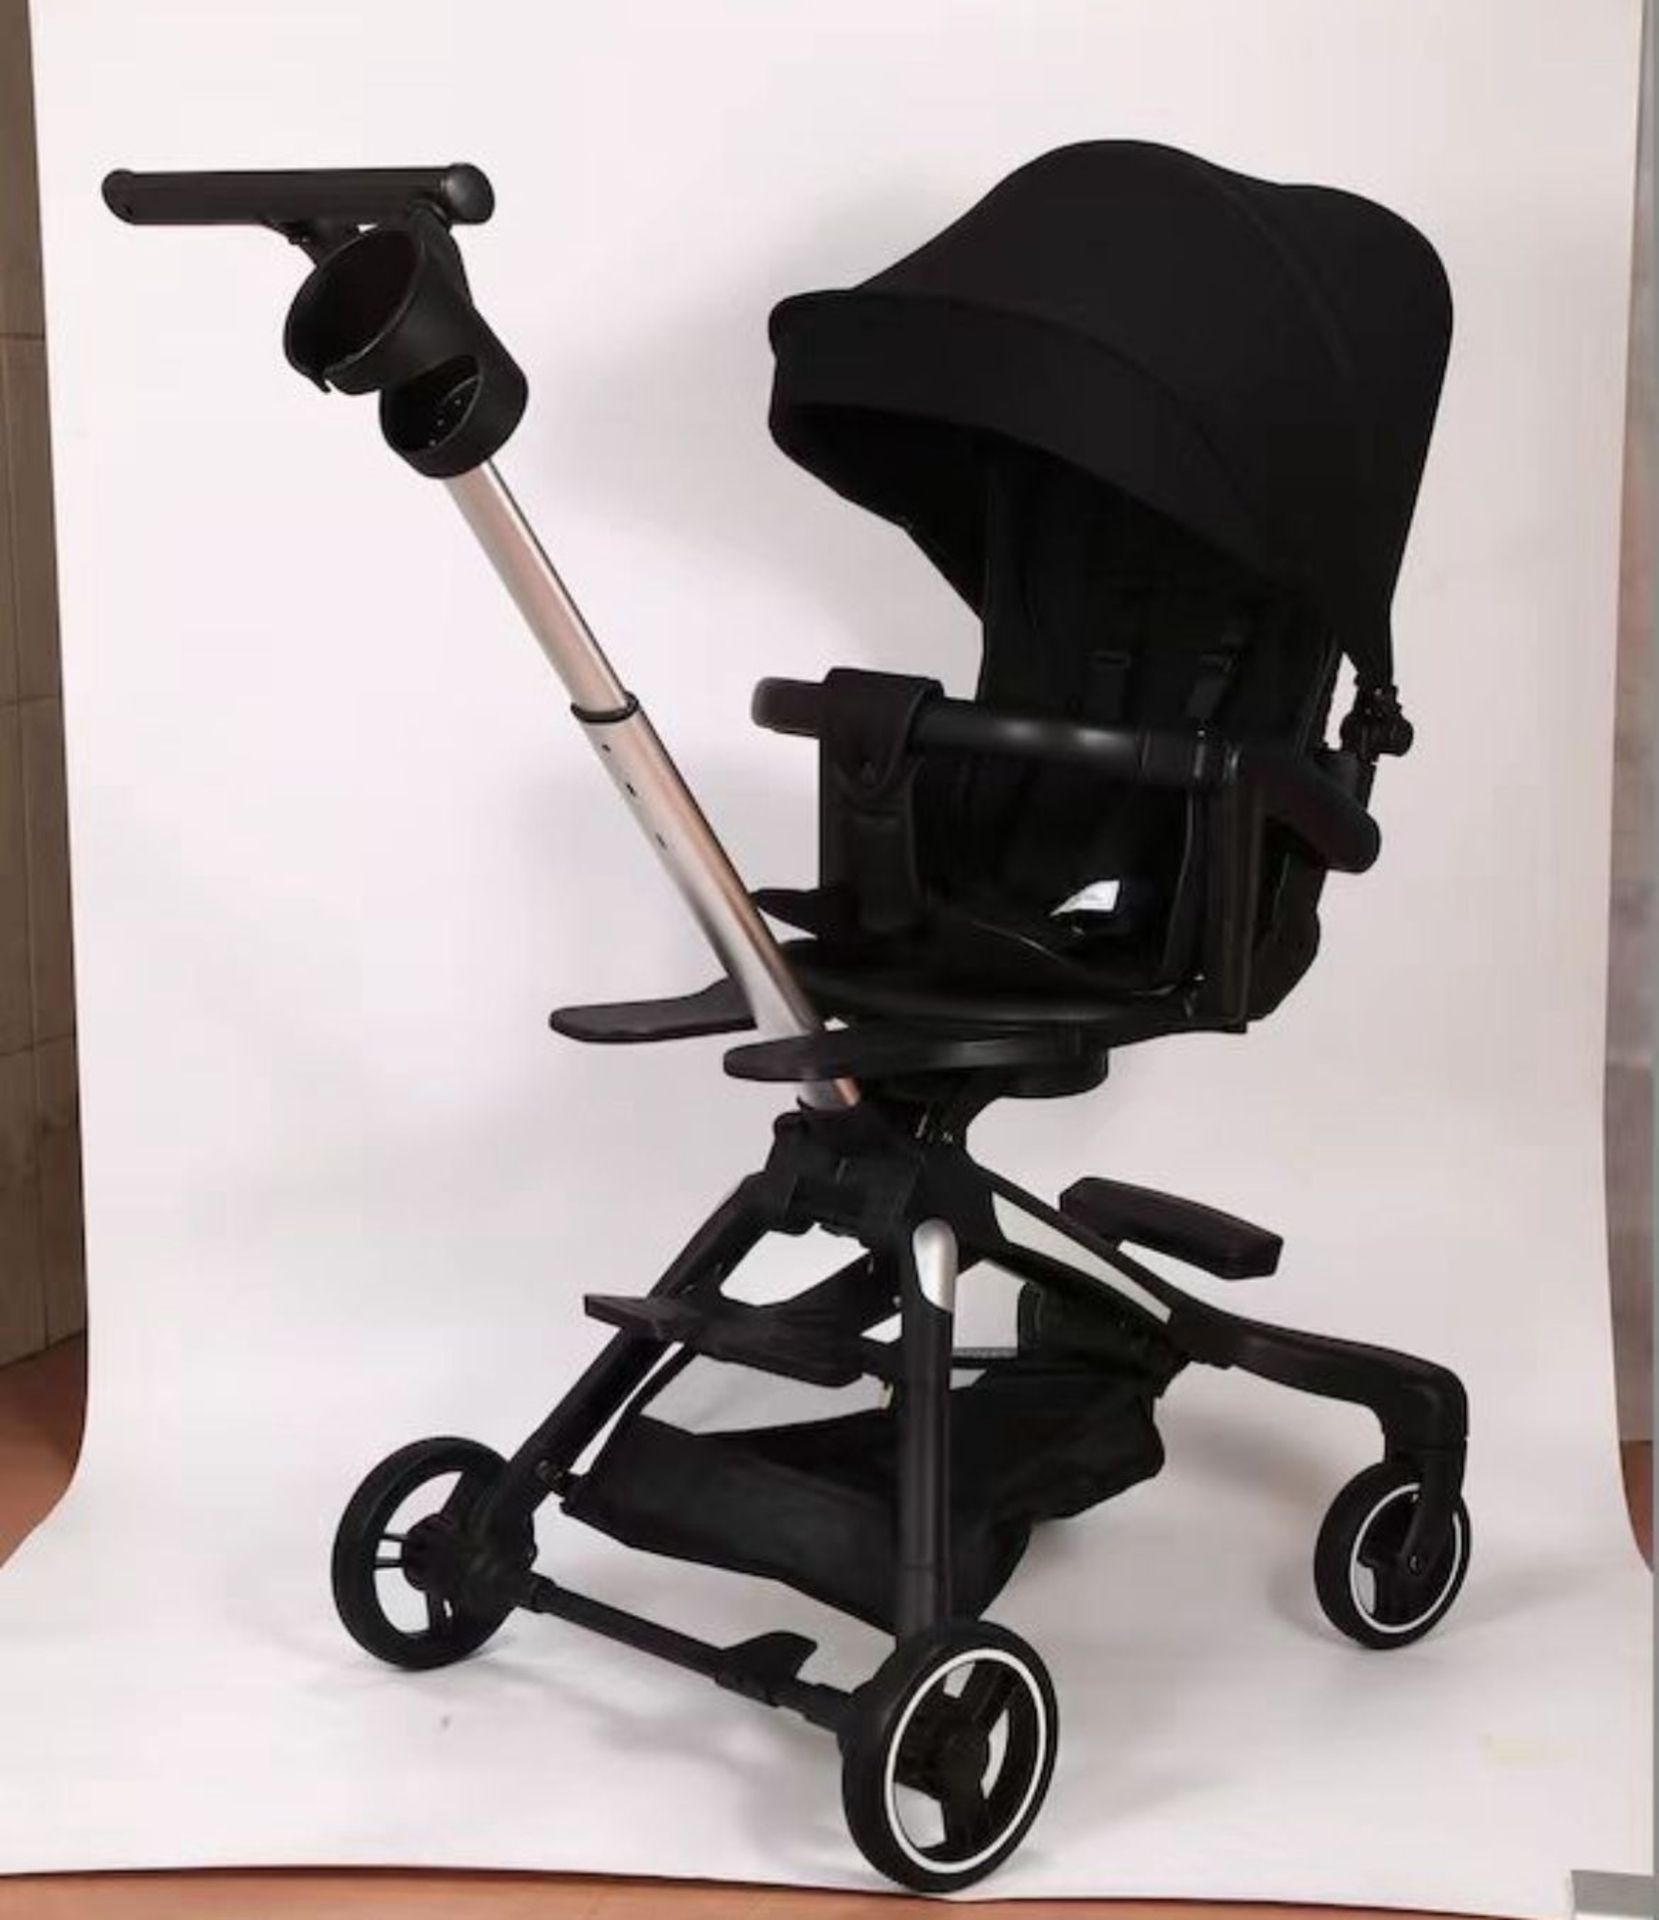 1X BRAND NEW STOCK WHEELIVE 3IN1 BABY STROLLERS